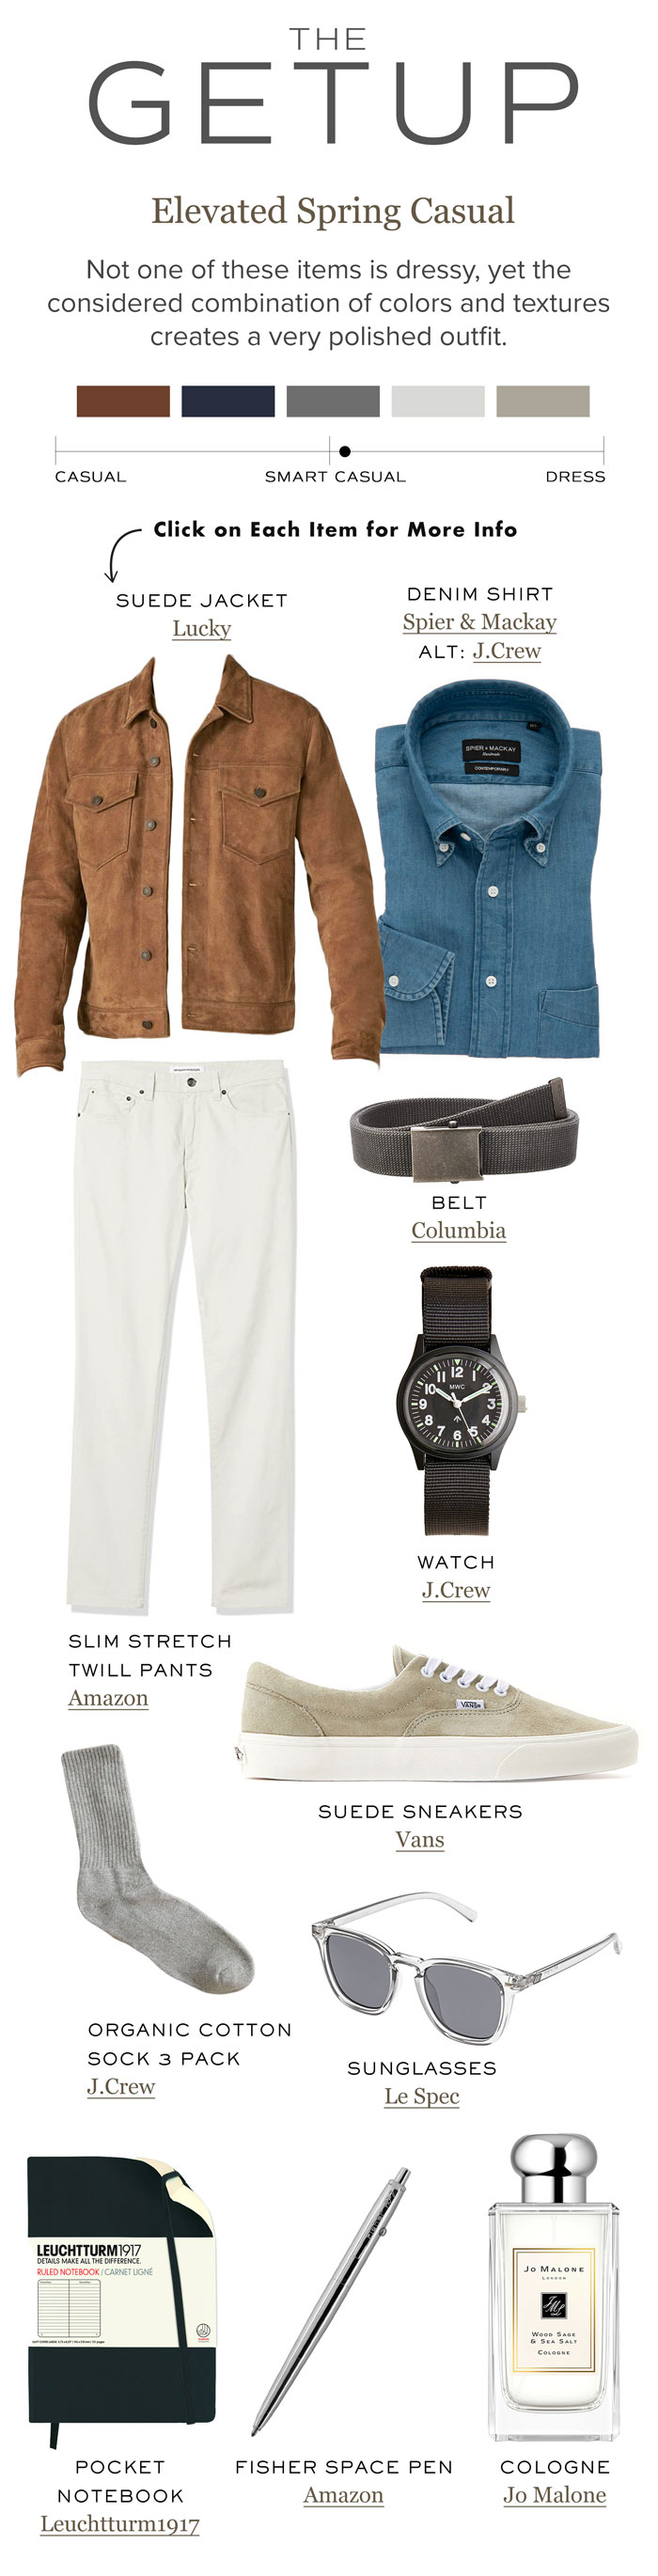 The Getup: Elevated Spring Casual outfit for men inforgraphic